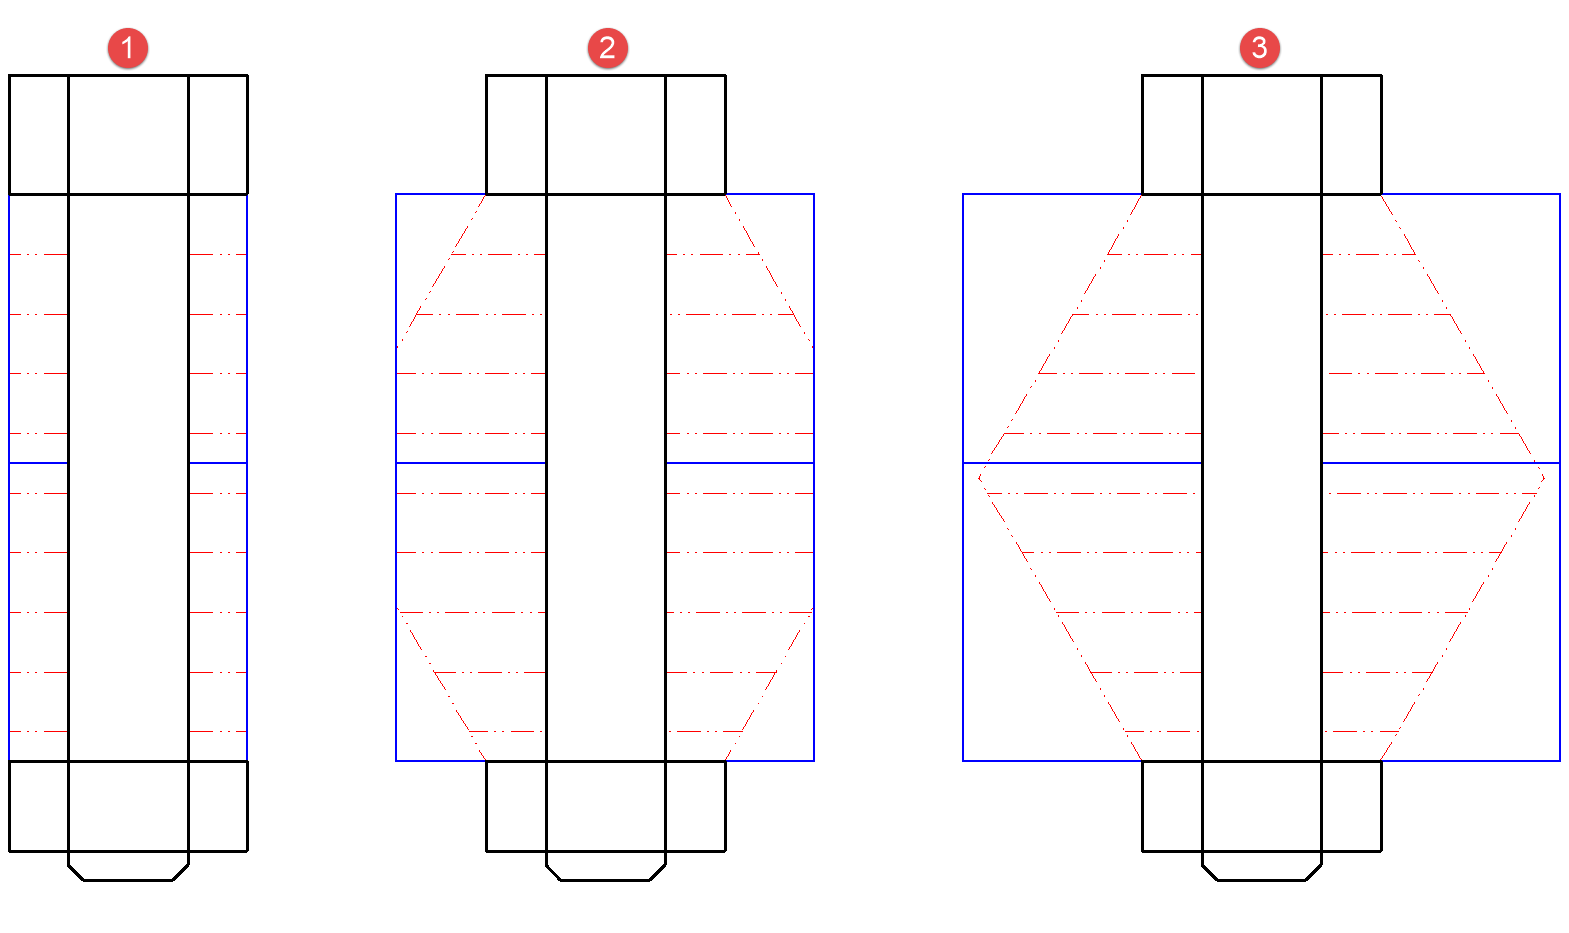 Load Propagation in Different Plate Dimensions